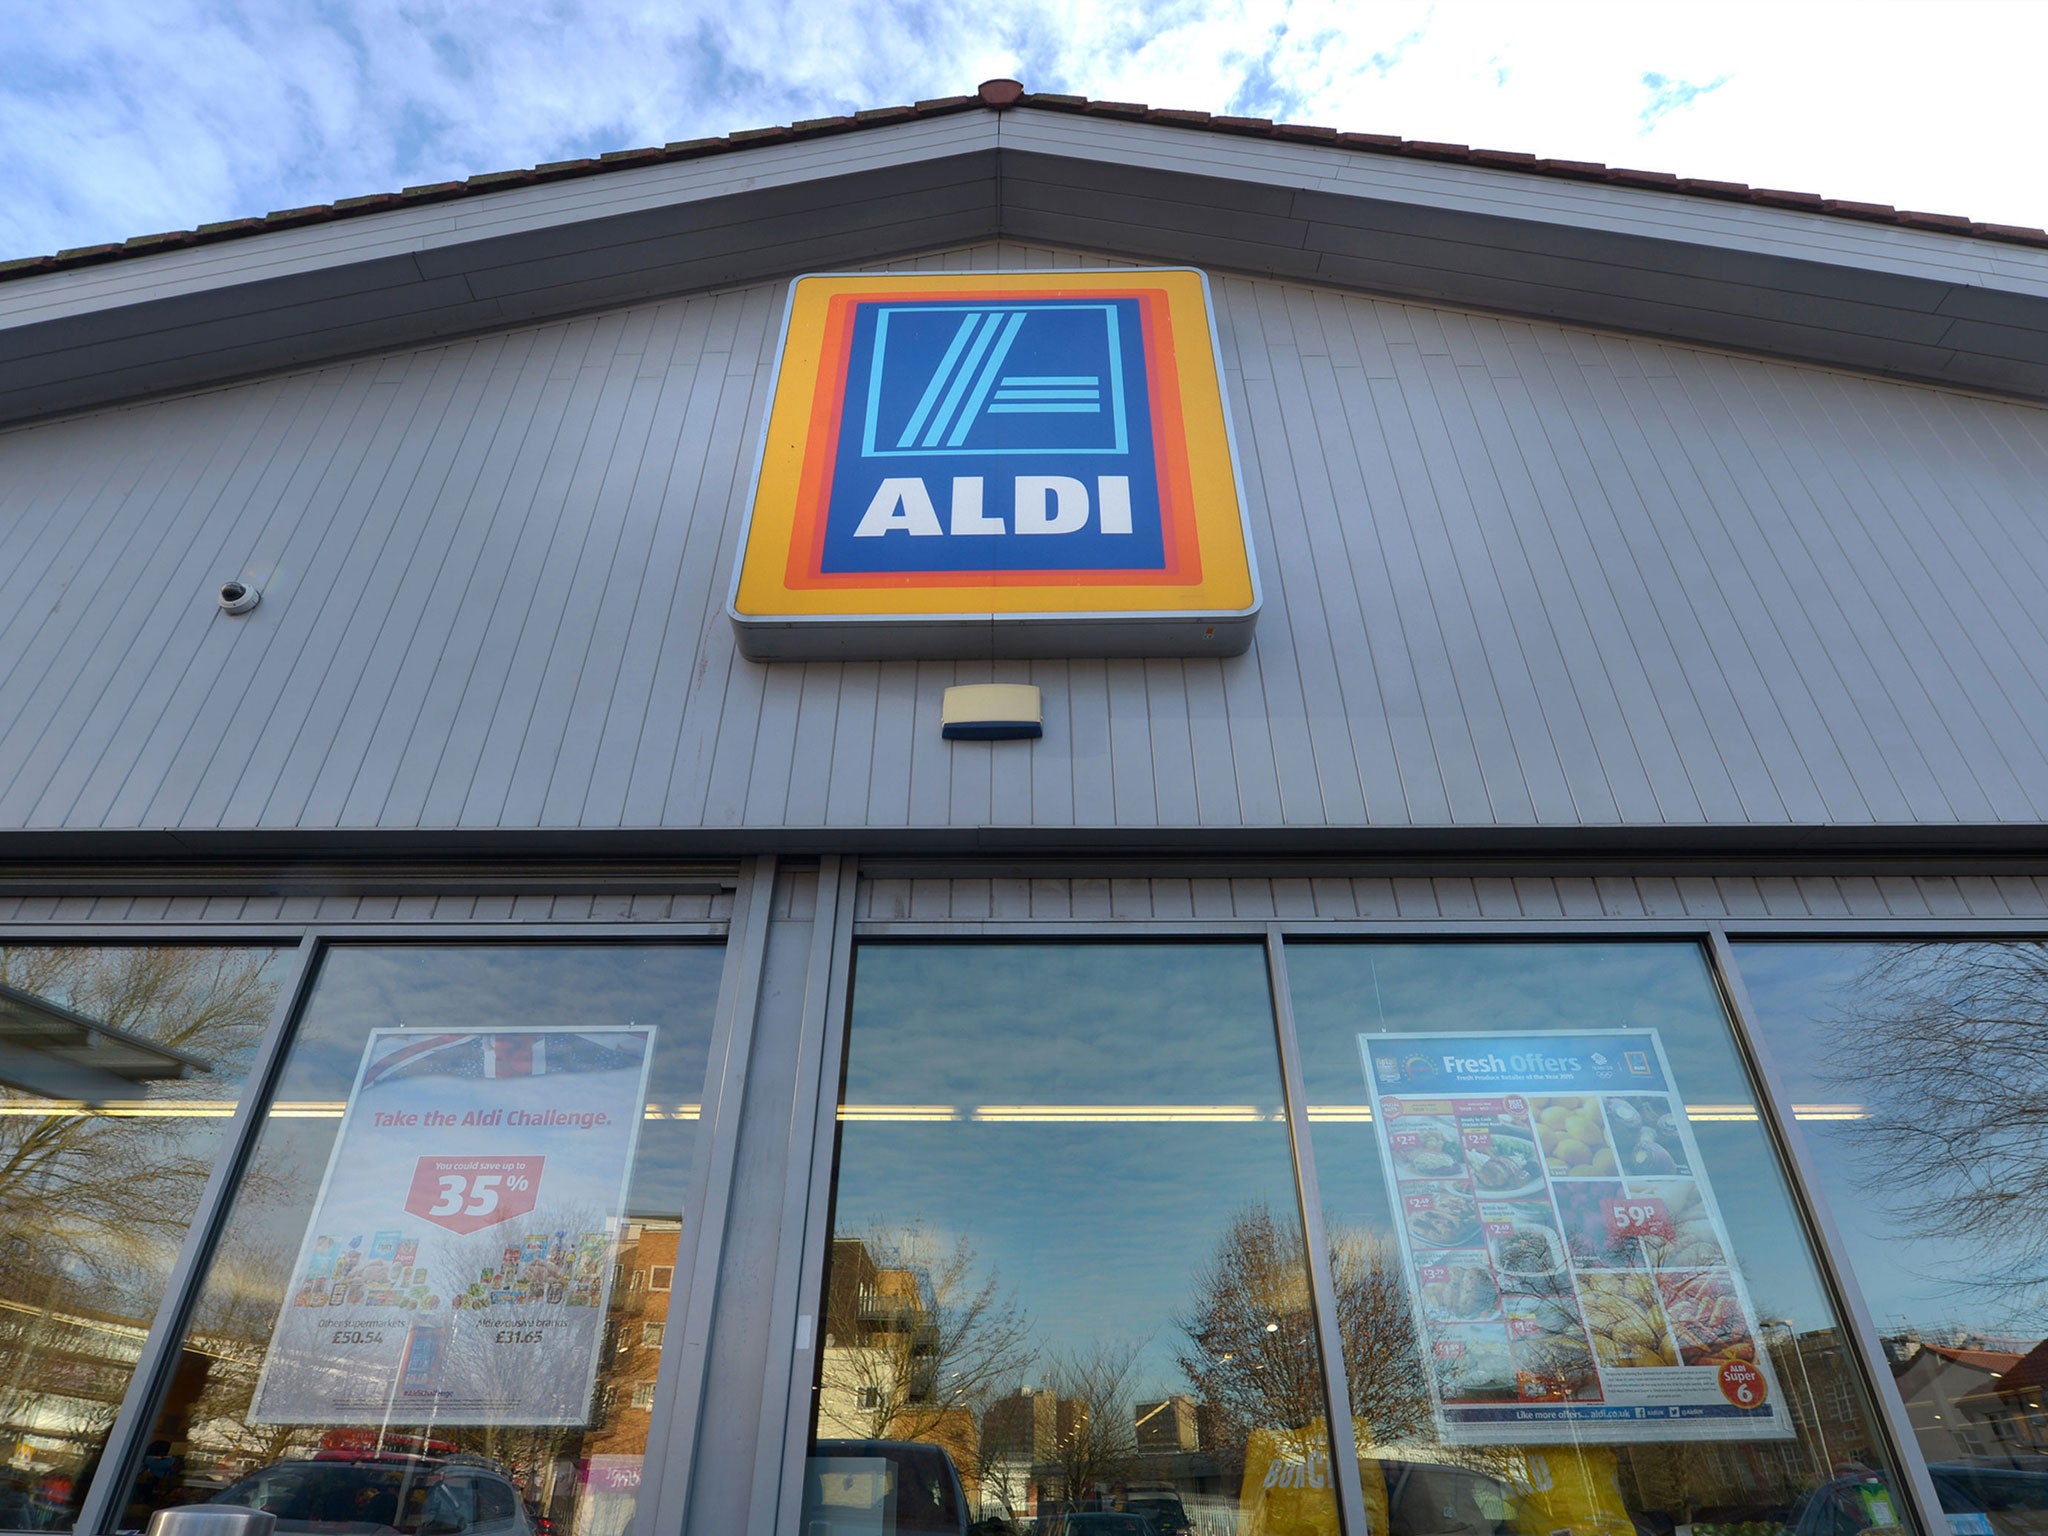 Aldi beat rival Lidl into second place with 9.1 per cent growth, according to Nielsen data